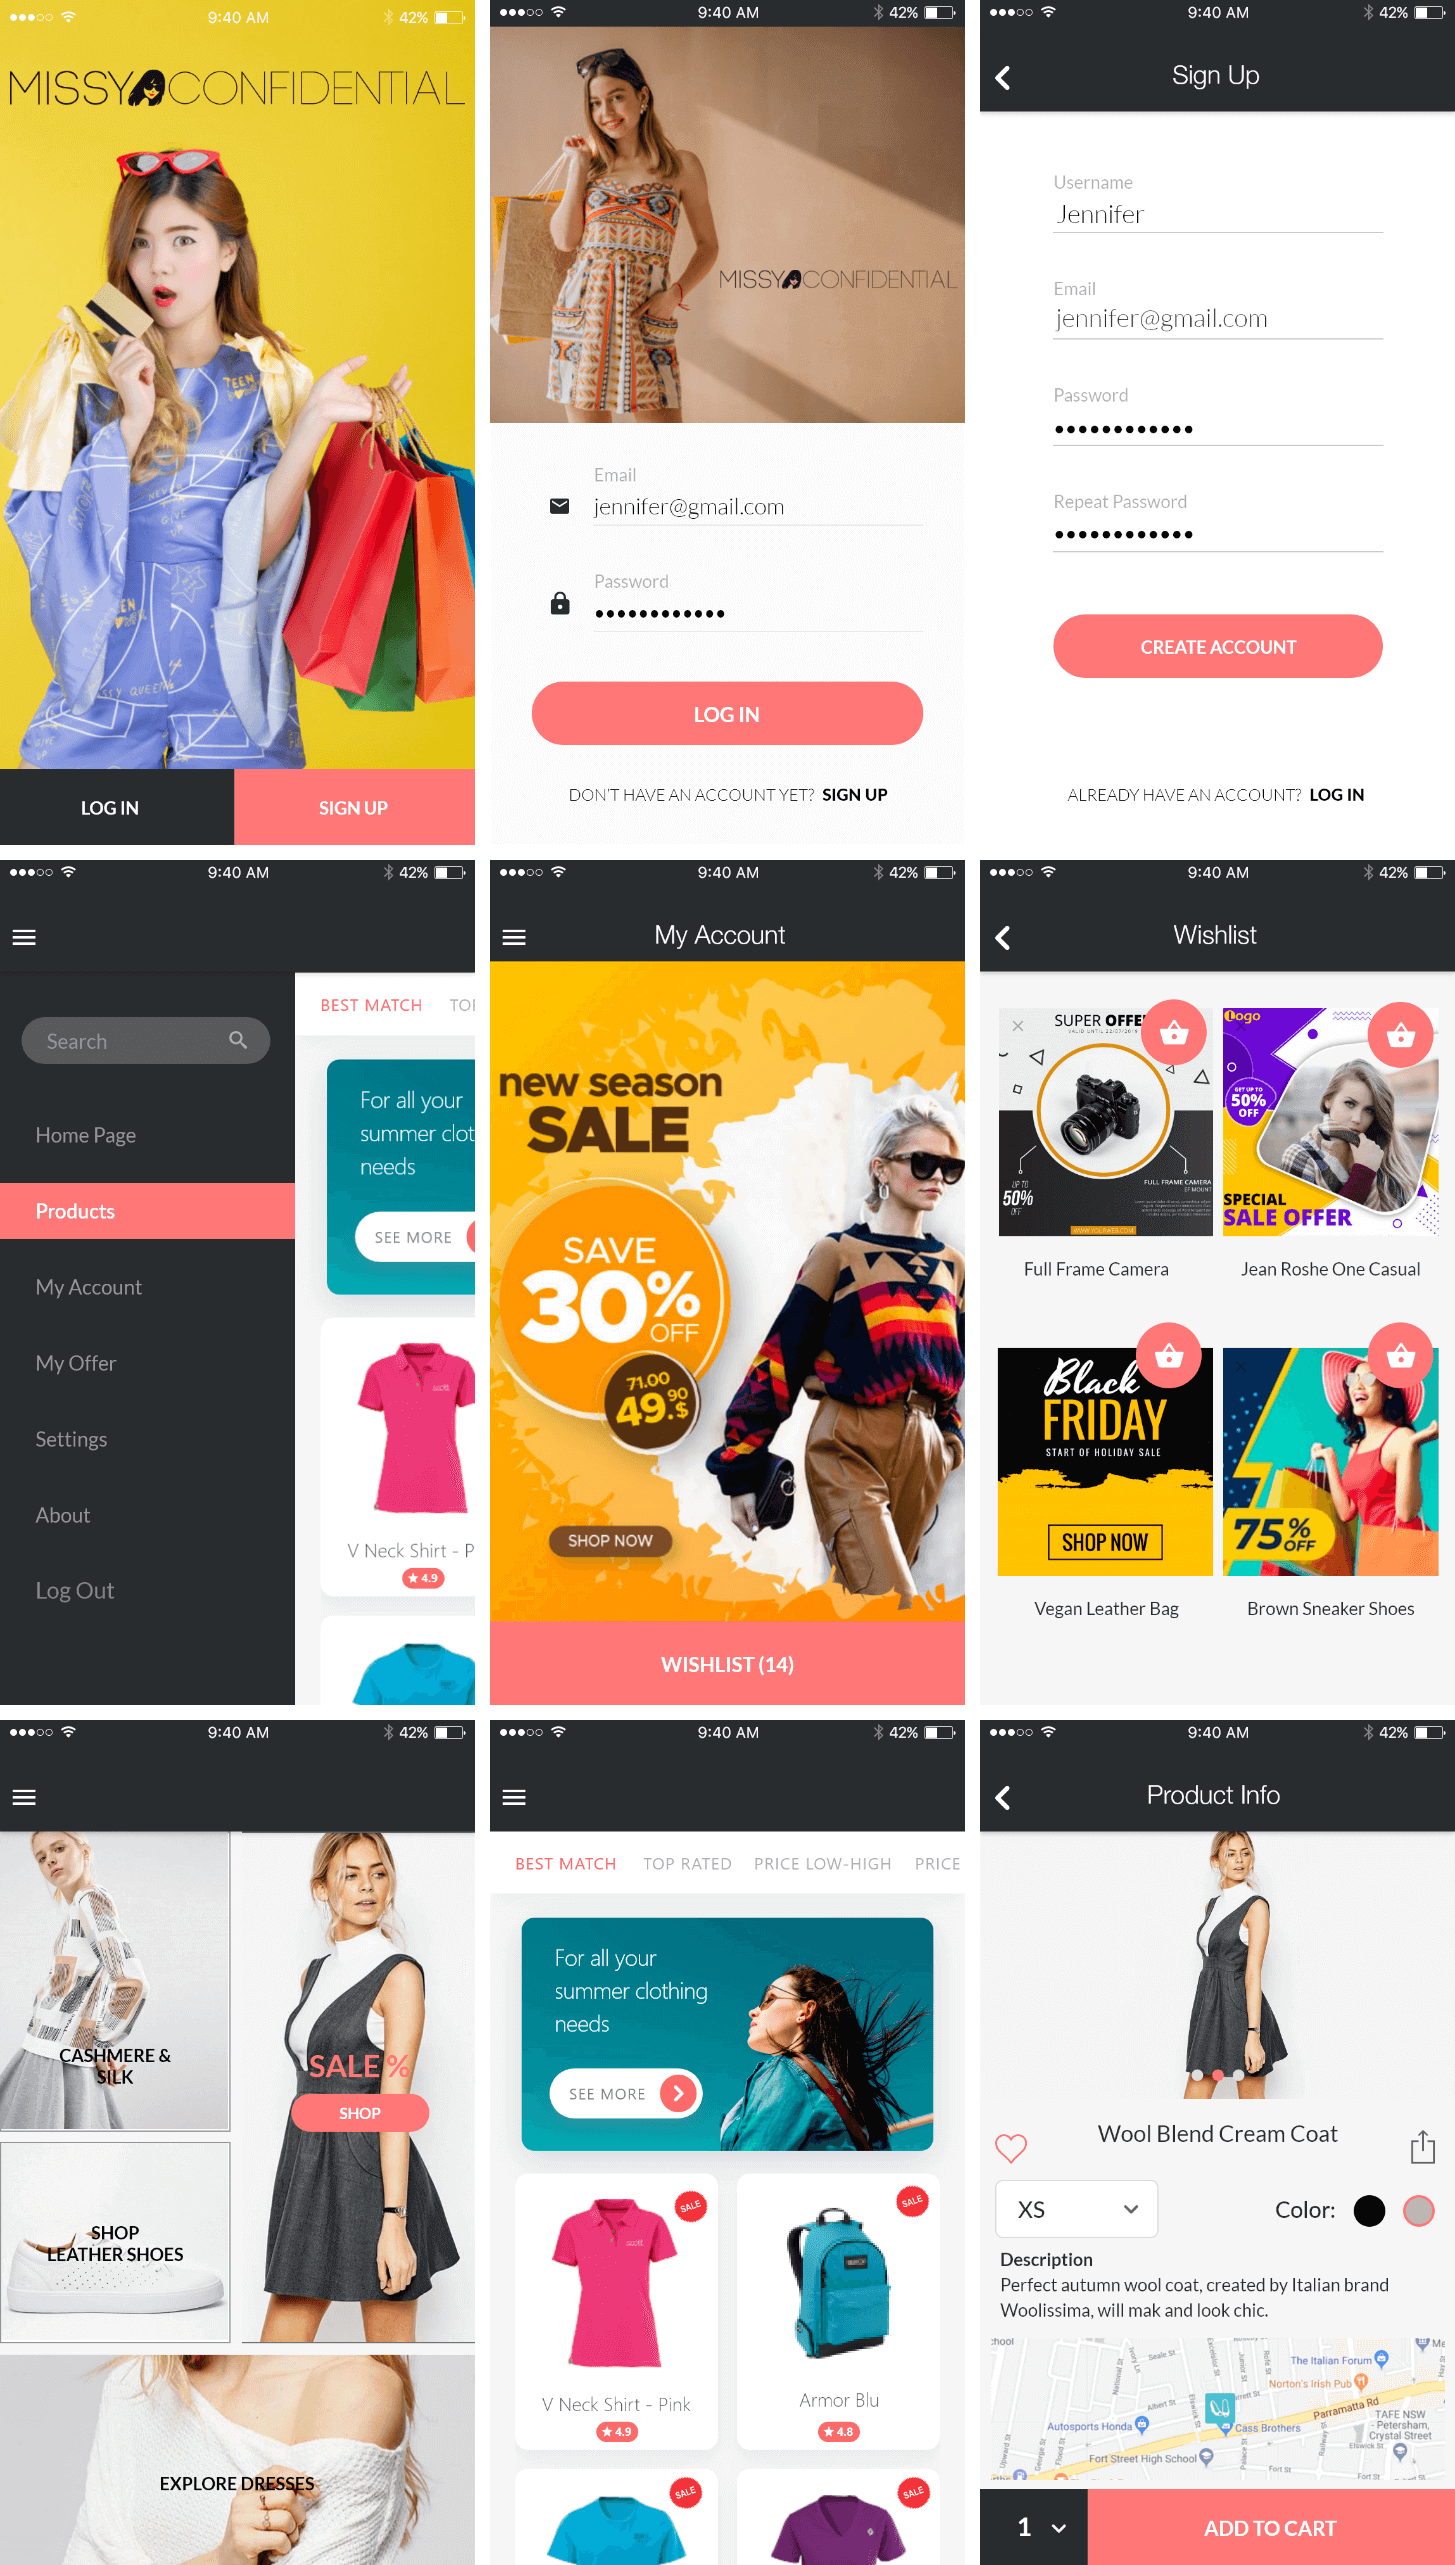 Missy Confidential Mobile Screens Mockup